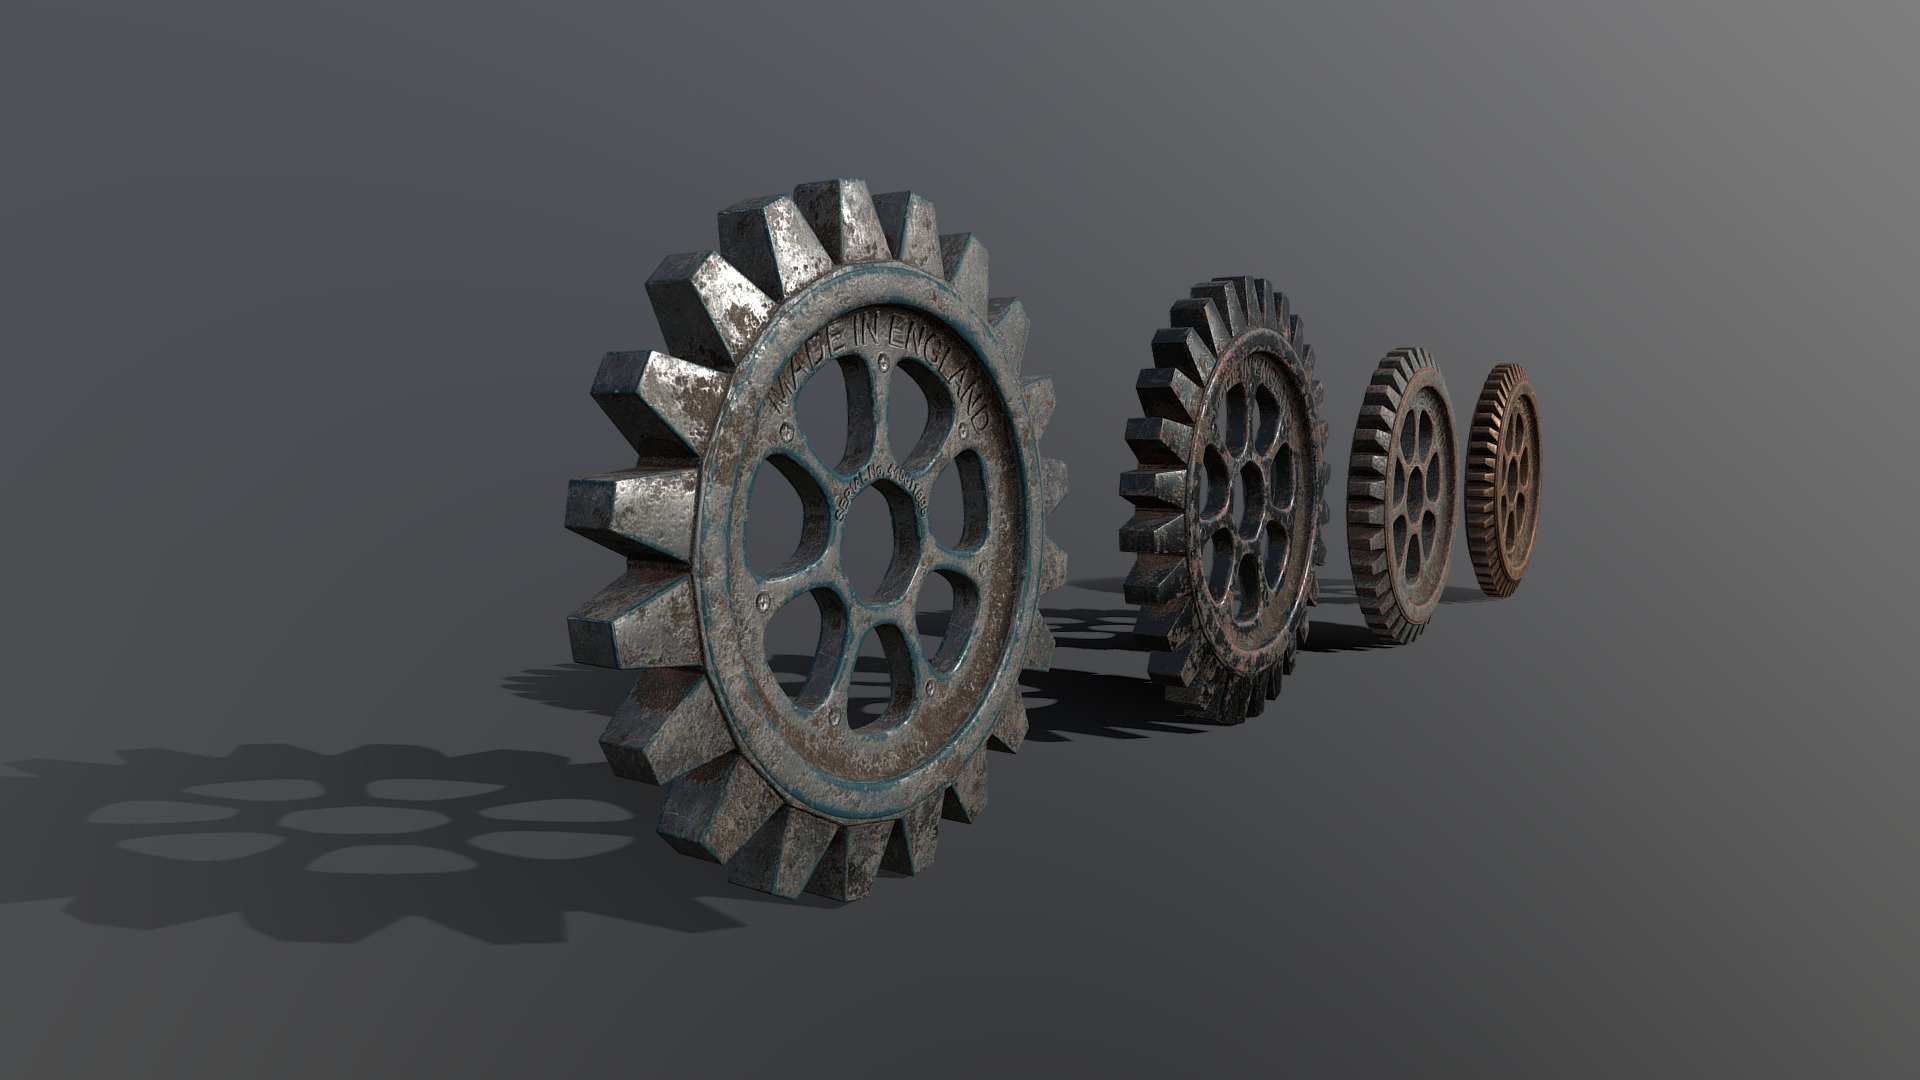 Industrial Gear Set 03

All objects Modelled to give a worn, aged look to each Gear, which you can easily build up a complex Gear system to fit within your project/scene

Great assets if you are creating a Steampunk scene!

Modelled in Blender 2.80 

3 Formats included:

Blend

Fbx

Obj/Mtl

All Textures

Textured in Substance Painter 2

Approximate Diameter of each Gear: 1000cm

Scale: 1.000 Metric

2K Resolution Maps / PBR /: Colour, Metallic, Roughness &amp; Normal 

(Height Maps provided in the Textures folder if you wish to use them)

2048 x 2048 Maps

Origin of all Models: Centre Of Mass

Please note if you are using EEVEE:

You may need to go into the Render Properties Tab - Performance - Enable High Quality Normals

Unwrapped - non overlapping UVs

Clean Topology, no loose or double Vertices

Of course any of these Objects can be duplicated as many times as you like - Multiple Industrial Gears!

Thanks for your interest &amp; support!

MagicCGIStudios - Industrial Gear Set 03 - Buy Royalty Free 3D model by MagicCGIStudios 3d model